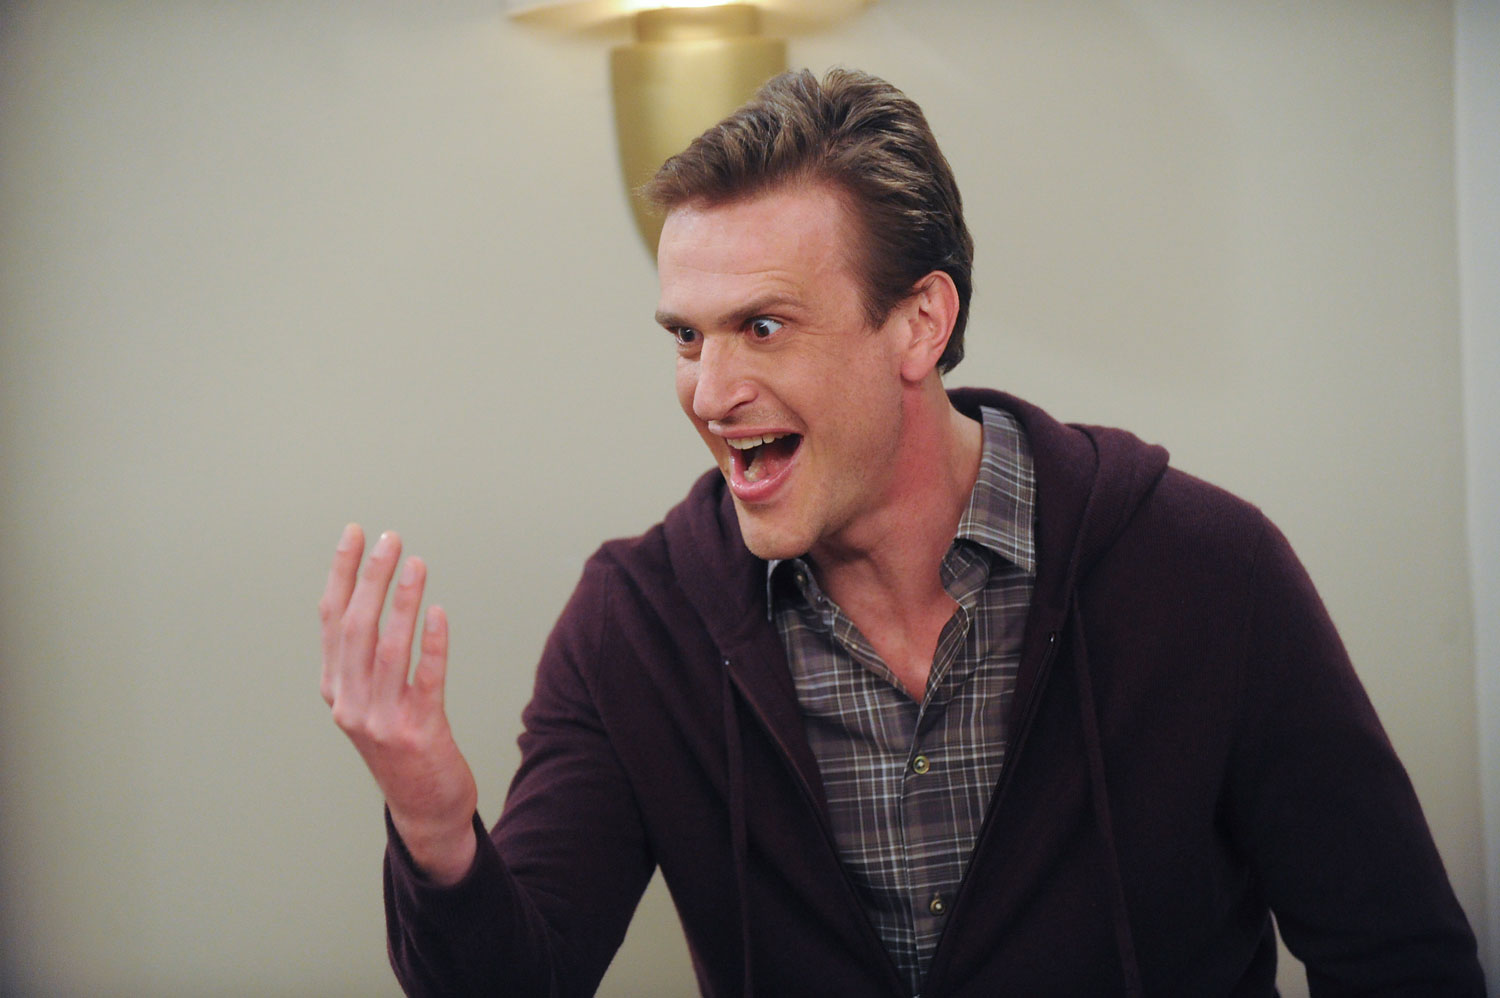 Jason Segel as Marshall in the "Slappointment in Slapmarra" episode of How I Met Your Mother. (Ron P. Jaffe / Fox)